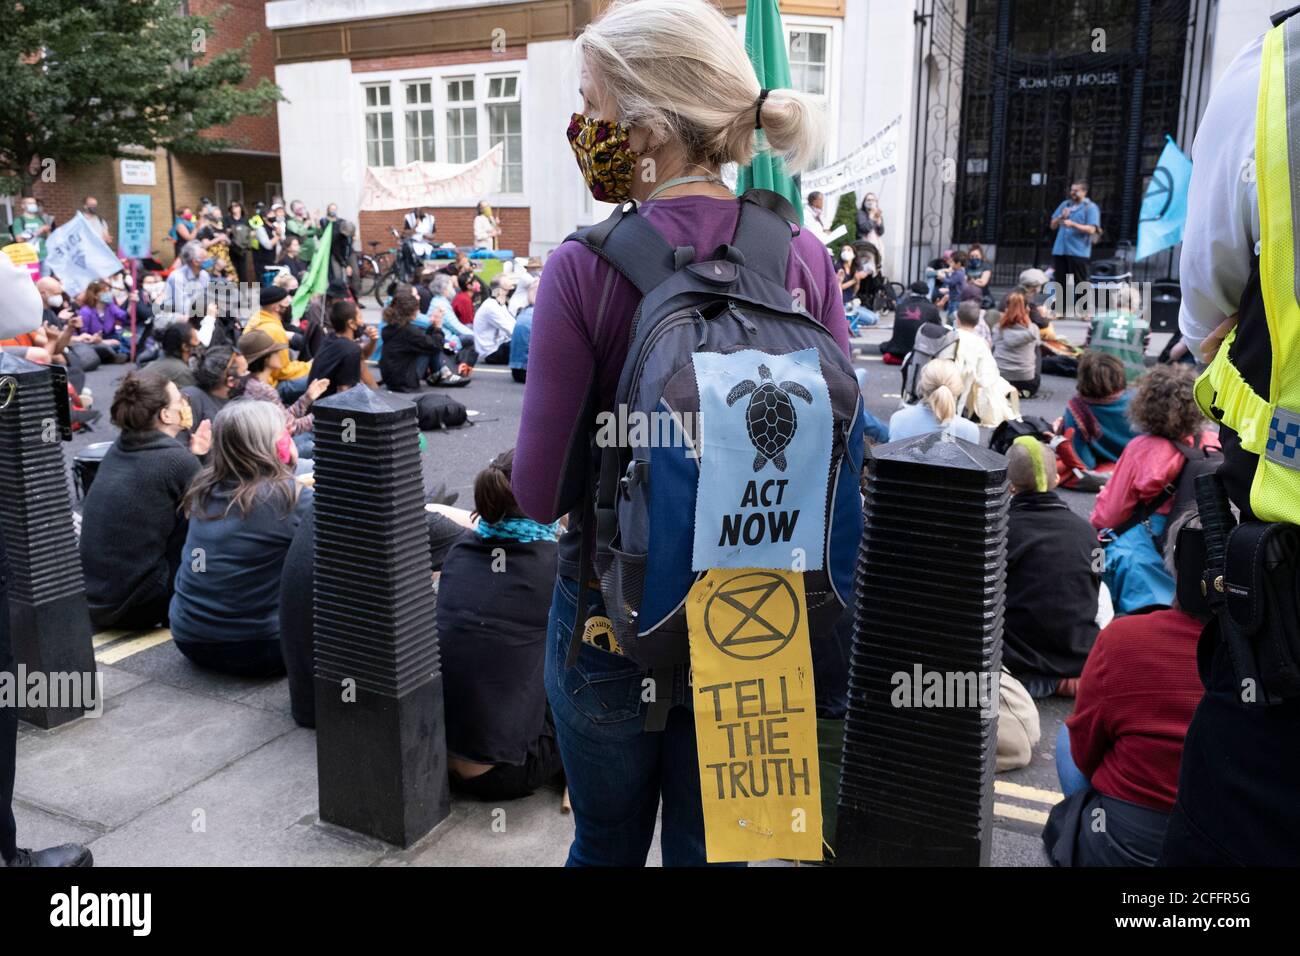 Climate justice is migrant justice protesters at an Extinction Rebellion demonstration gathering outside the Home Office in solidarity with migrants and those who suffer because of migration systems wordwide on 4th September 2020 in London, United Kingdom. With government resitting after summer recess, the climate action group has organised two weeks of events, protest and disruption across the capital. Extinction Rebellion is a climate change group started in 2018 and has gained a huge following of people committed to peaceful protests. These protests are highlighting that the government is n Stock Photo